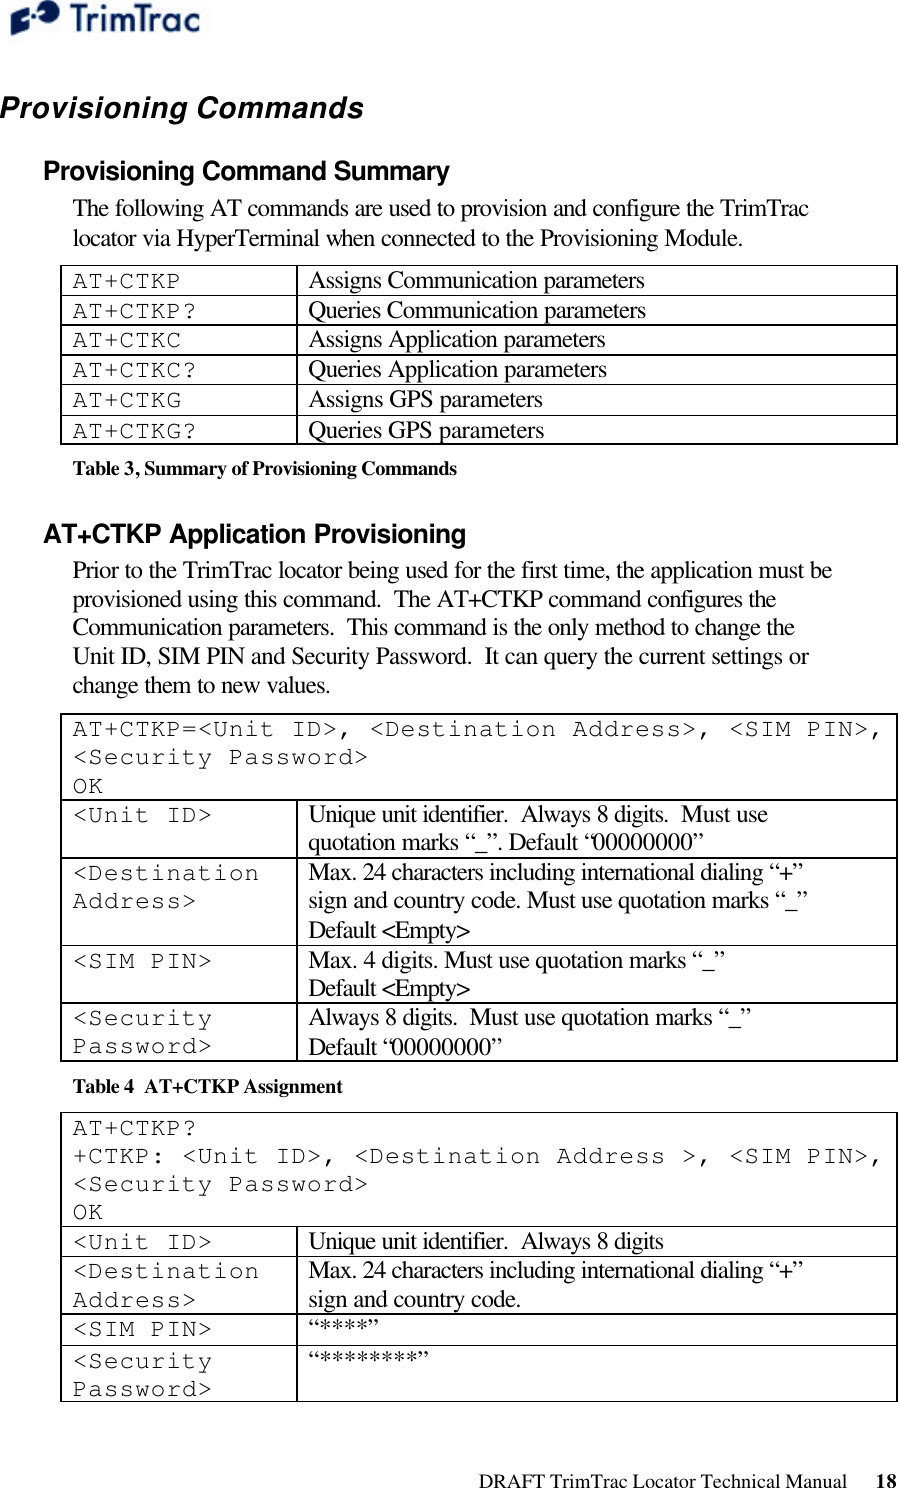  DRAFT TrimTrac Locator Technical Manual      18 Provisioning Commands Provisioning Command Summary  The following AT commands are used to provision and configure the TrimTrac locator via HyperTerminal when connected to the Provisioning Module. AT+CTKP Assigns Communication parameters AT+CTKP? Queries Communication parameters AT+CTKC Assigns Application parameters AT+CTKC? Queries Application parameters AT+CTKG Assigns GPS parameters AT+CTKG? Queries GPS parameters Table 3, Summary of Provisioning Commands AT+CTKP Application Provisioning Prior to the TrimTrac locator being used for the first time, the application must be provisioned using this command.  The AT+CTKP command configures the Communication parameters.  This command is the only method to change the Unit ID, SIM PIN and Security Password.  It can query the current settings or change them to new values. AT+CTKP=&lt;Unit ID&gt;, &lt;Destination Address&gt;, &lt;SIM PIN&gt;, &lt;Security Password&gt; OK &lt;Unit ID&gt; Unique unit identifier.  Always 8 digits.  Must use quotation marks “_”. Default “00000000” &lt;Destination Address&gt; Max. 24 characters including international dialing “+” sign and country code. Must use quotation marks “_” Default &lt;Empty&gt; &lt;SIM PIN&gt; Max. 4 digits. Must use quotation marks “_”  Default &lt;Empty&gt; &lt;Security Password&gt; Always 8 digits.  Must use quotation marks “_”  Default “00000000” Table 4  AT+CTKP Assignment AT+CTKP? +CTKP: &lt;Unit ID&gt;, &lt;Destination Address &gt;, &lt;SIM PIN&gt;, &lt;Security Password&gt; OK &lt;Unit ID&gt; Unique unit identifier.  Always 8 digits &lt;Destination Address&gt; Max. 24 characters including international dialing “+” sign and country code. &lt;SIM PIN&gt; “****” &lt;Security Password&gt; “********” 